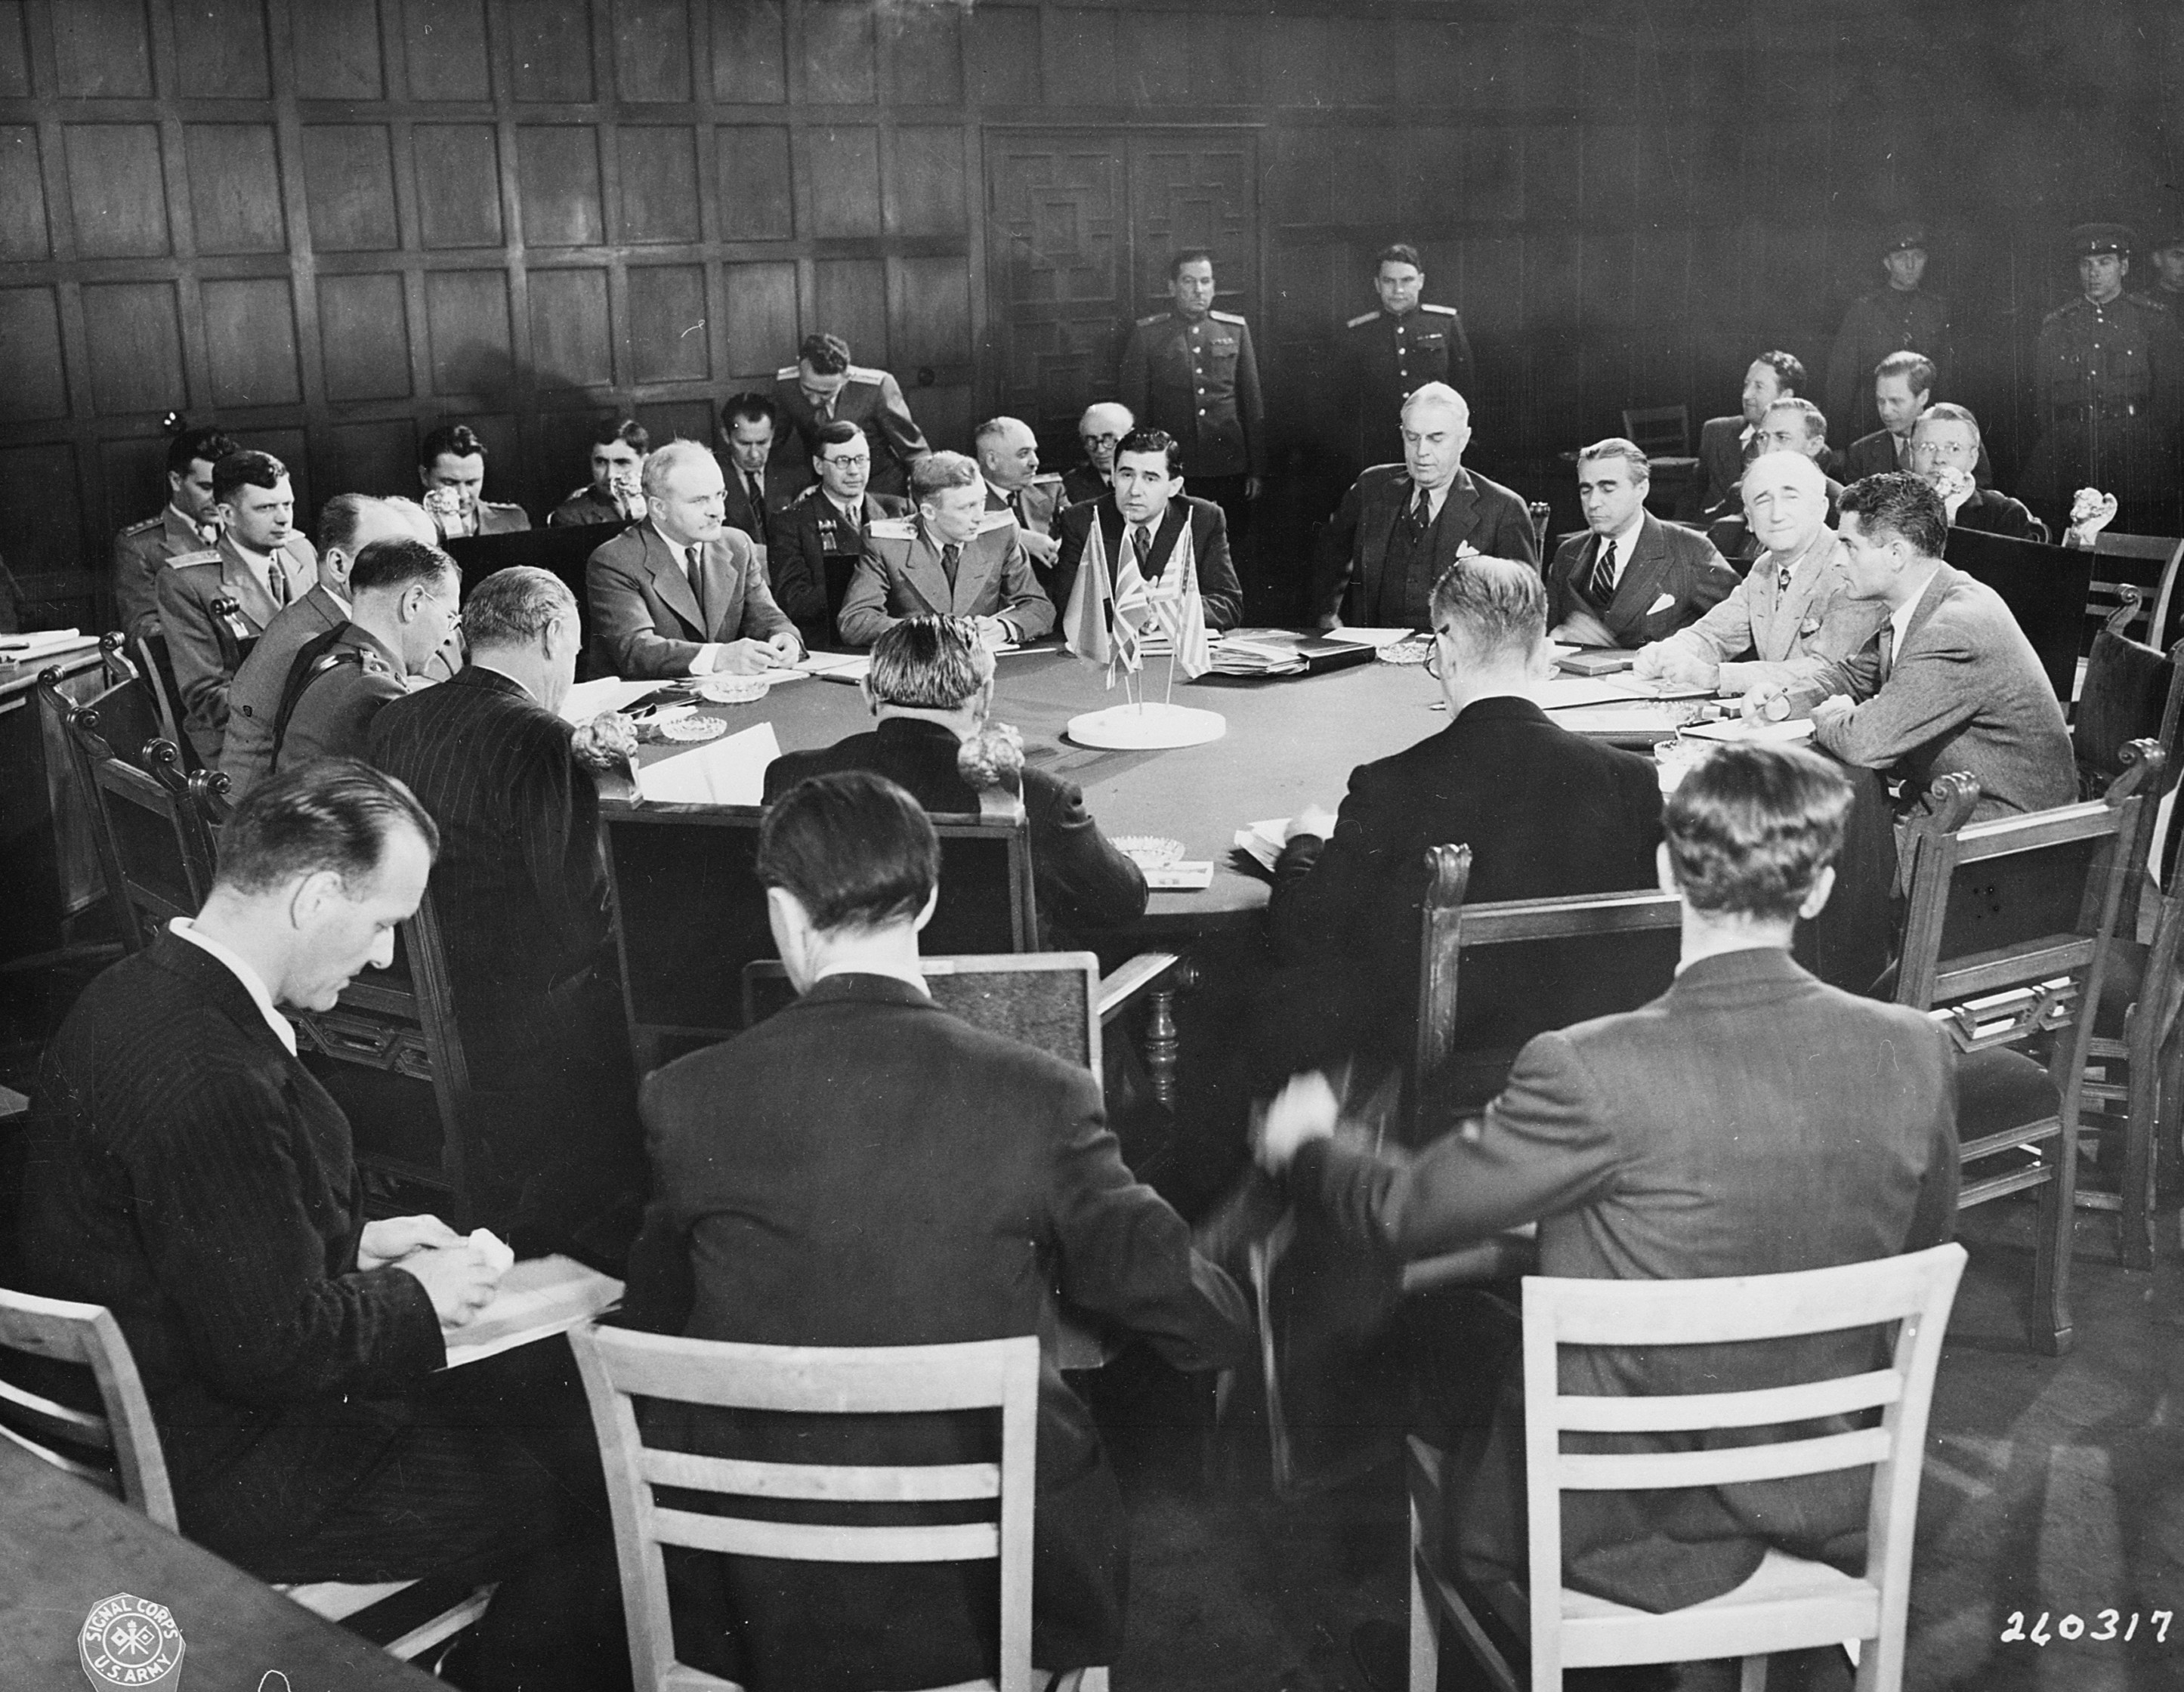 Meeting of Allied foreign ministers, Schloss Cecilienhof, Potsdam, Germany, 24 Jul 1945, photo 3 of 3; note James Byrnes of US, Anthony Eden of UK, and Vyacheslav Molotov of USSR